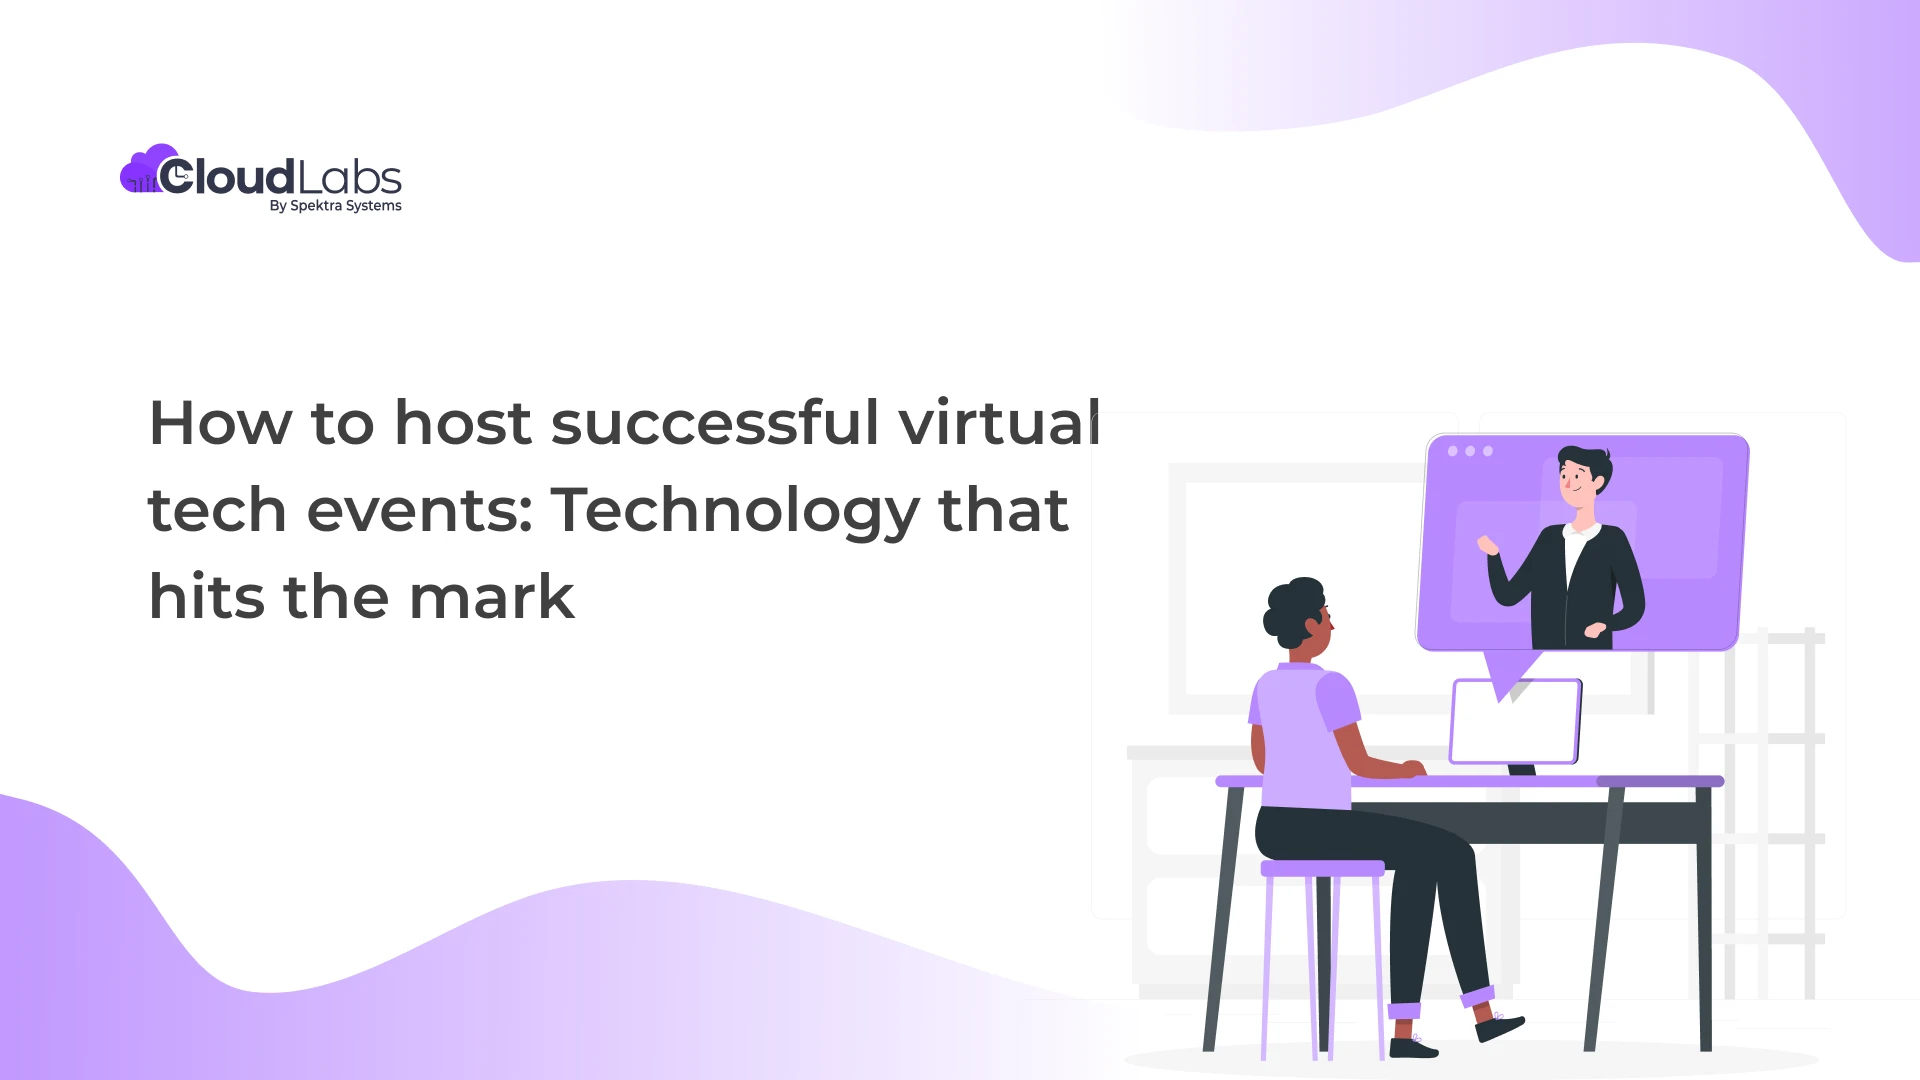 How to host successful virtual tech events: Technology that hits the mark